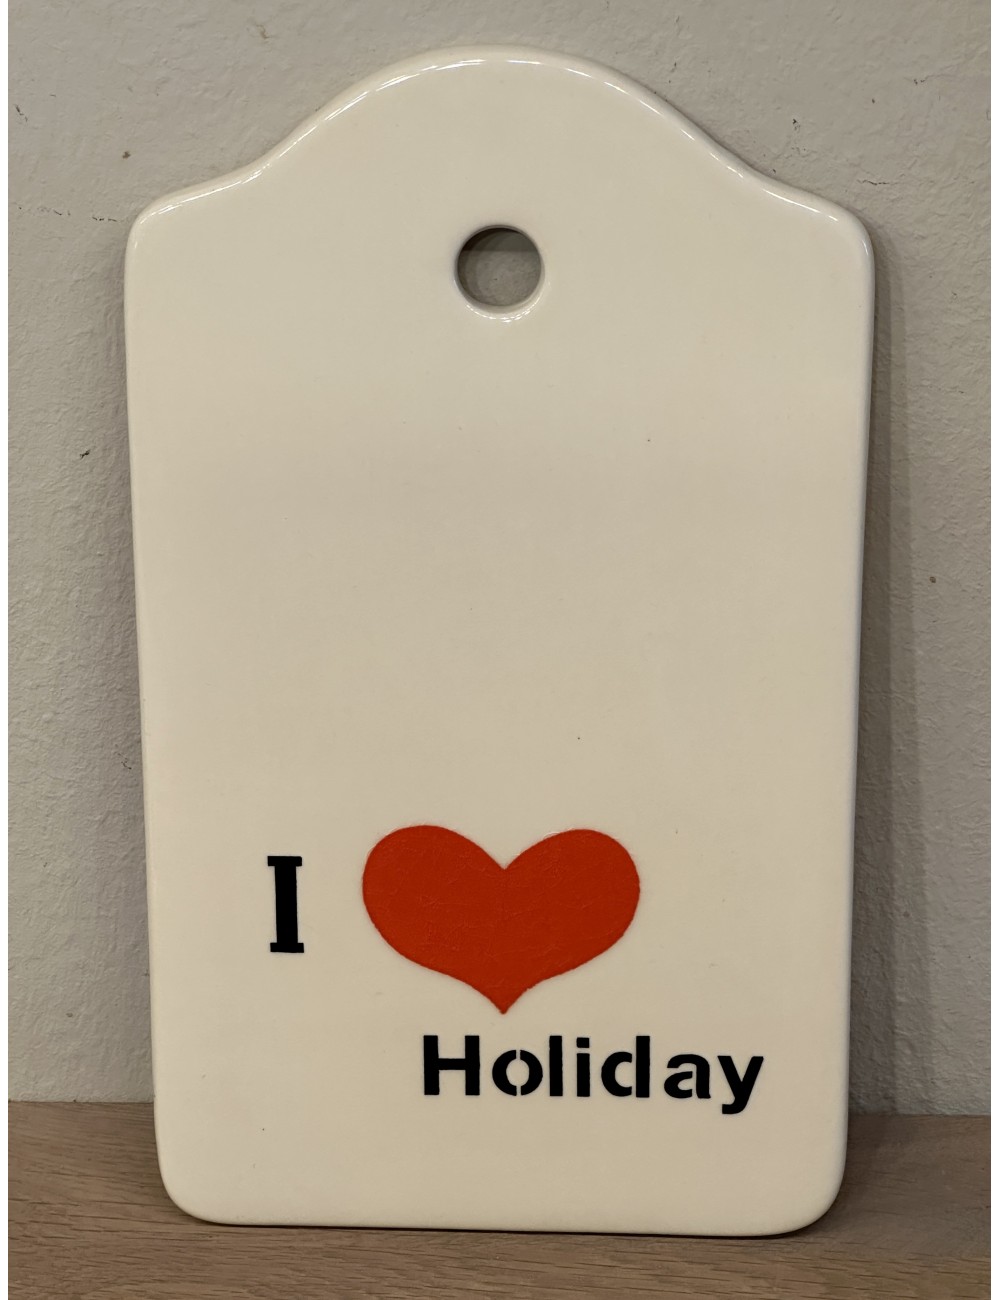 Sandwich board / Cutting board - unmarked - executed in white/cream with imprint in red 'I love Holiday'